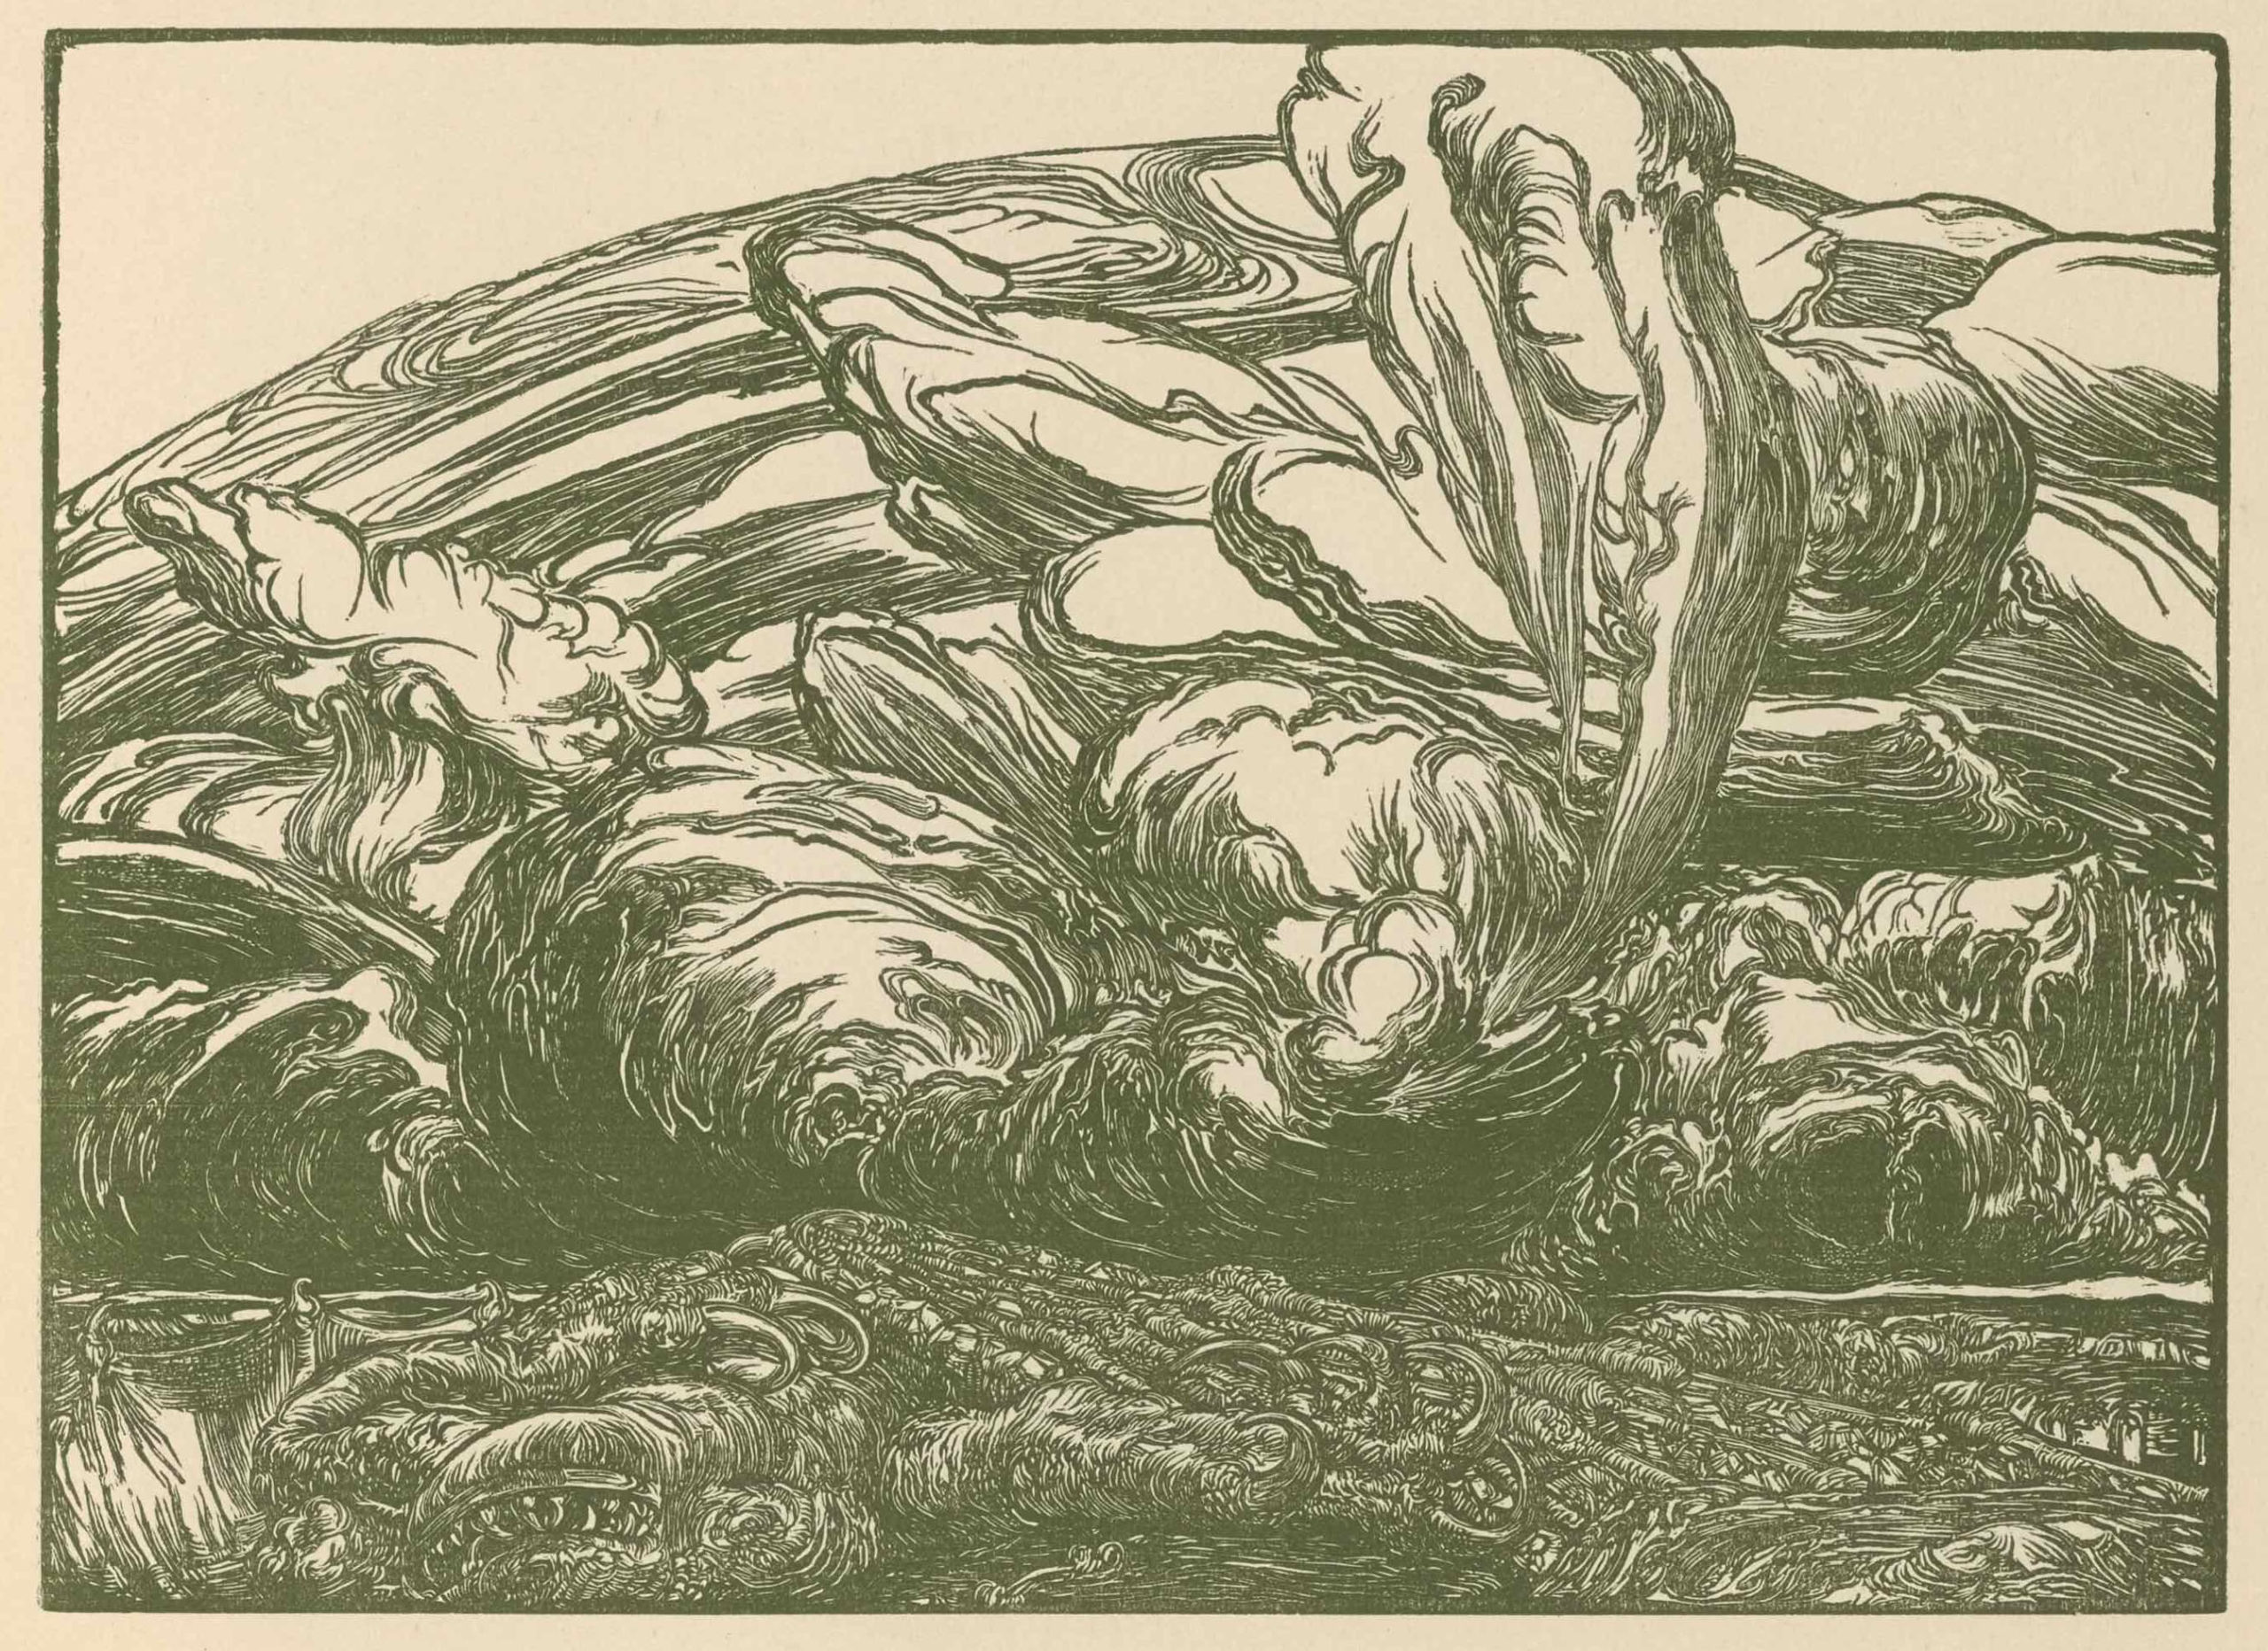 Printed in dark green ink, the rectangular woodcut is outlined with a thick edge.
      In the extreme 
      foreground of the image lies a dead dragon on its back, with extreme foreshortening,
      its glazed eye and 
      snout with bared teeth foremost. Its clawed left foreleg lies across the top of its
      scaled body and its 
      right foreleg stretches out beside it. One furled wing covers the rest of its body
      while another stretches 
      vertically on its left side. Above the corpse is a mass of clouds, shaped in a confusion
      of funnels and 
      whorls. The clouds take up the majority of the image plane, ending in a curved boundary
      between smoke and 
      sky just below the top of the image. One smoke funnel extends up past the edge of
      the arch, touching the 
      border.